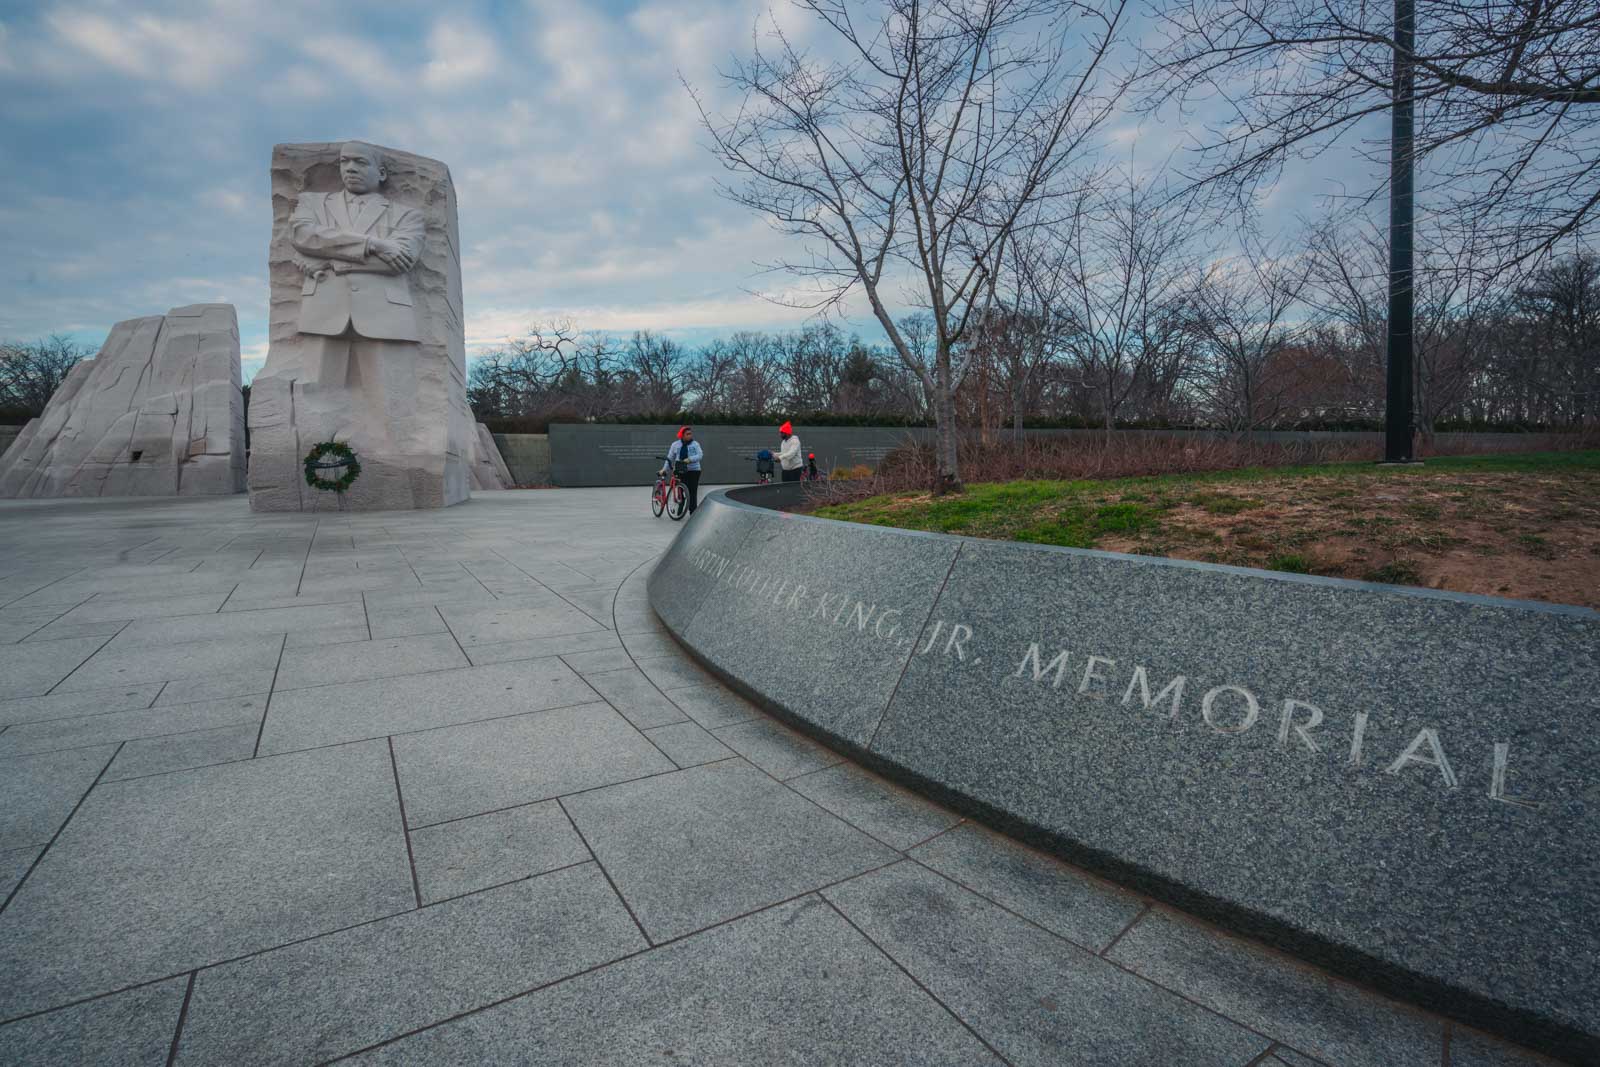 Things to do in Washington DC visit the Martin Luther King Jr Memorial 